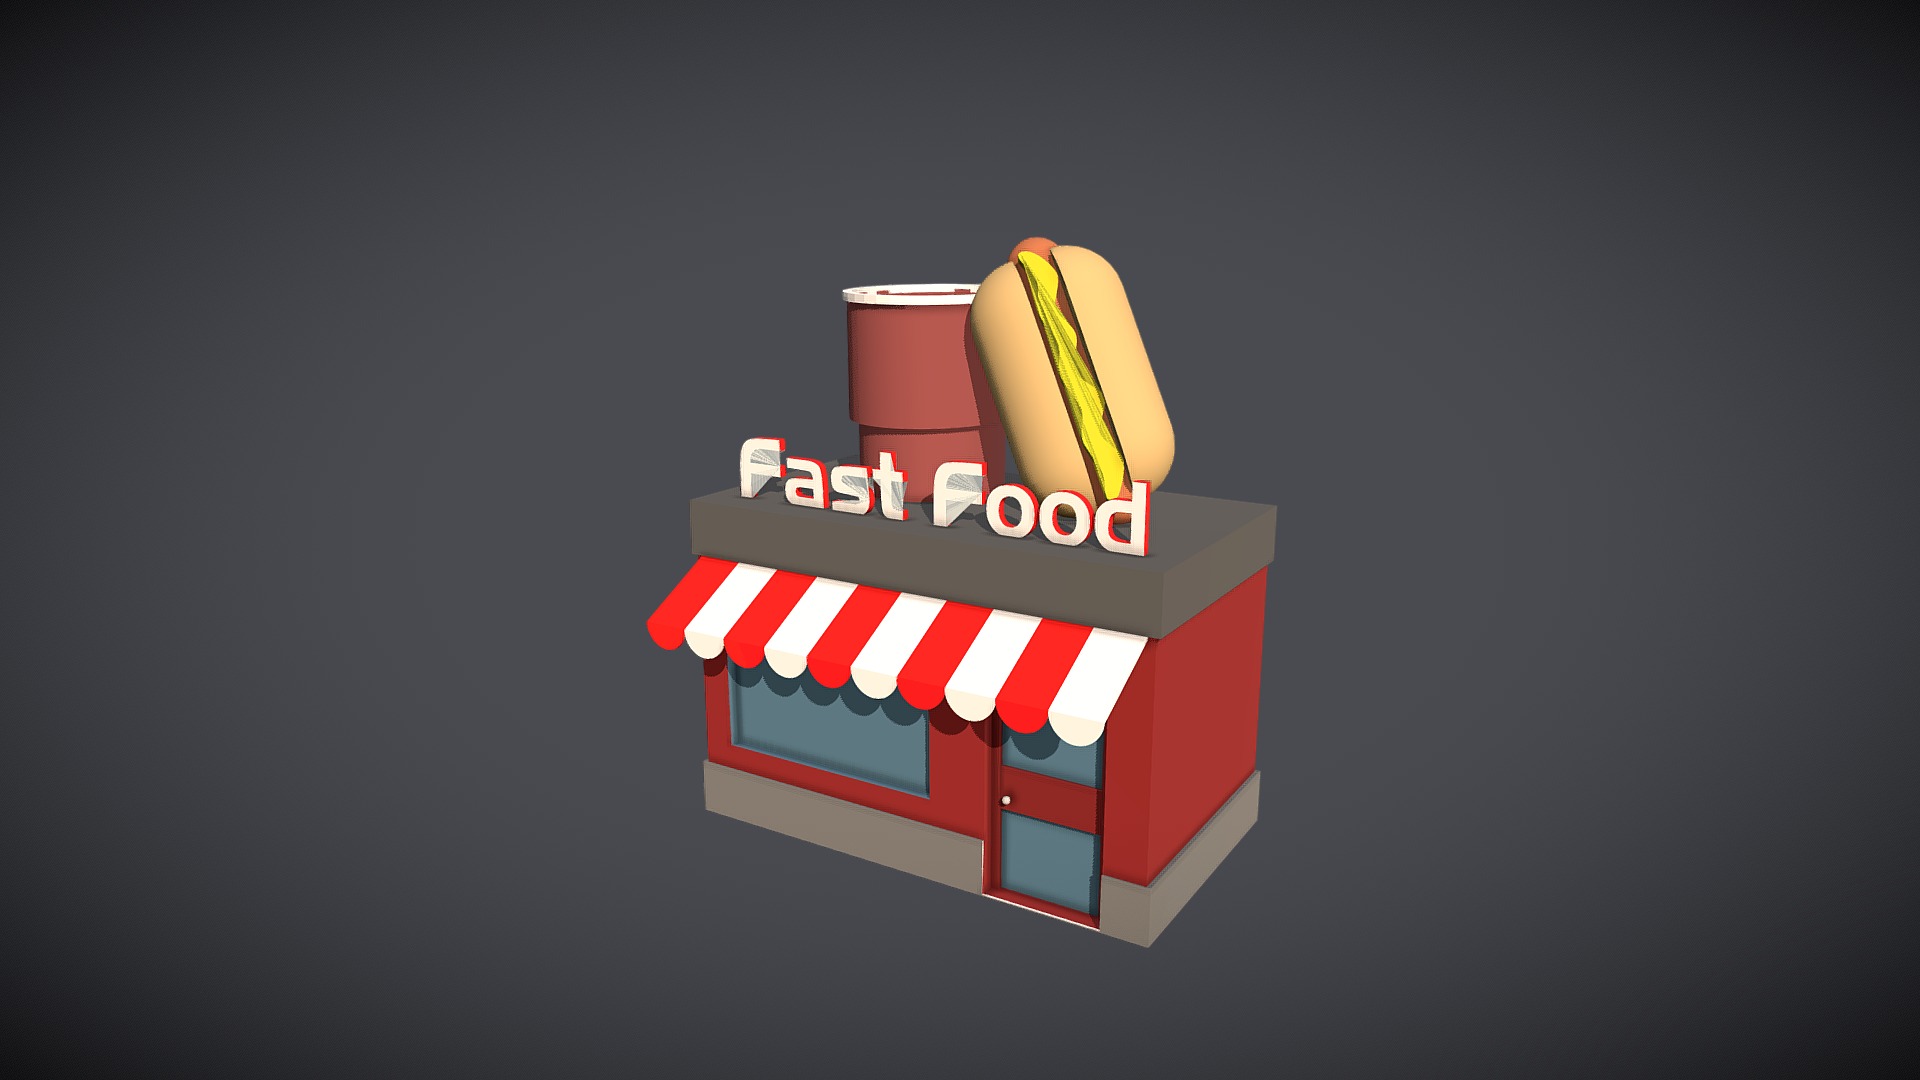 3D model Low-Poly Fast-Food - This is a 3D model of the Low-Poly Fast-Food. The 3D model is about a red and white cube with a yellow and black logo.